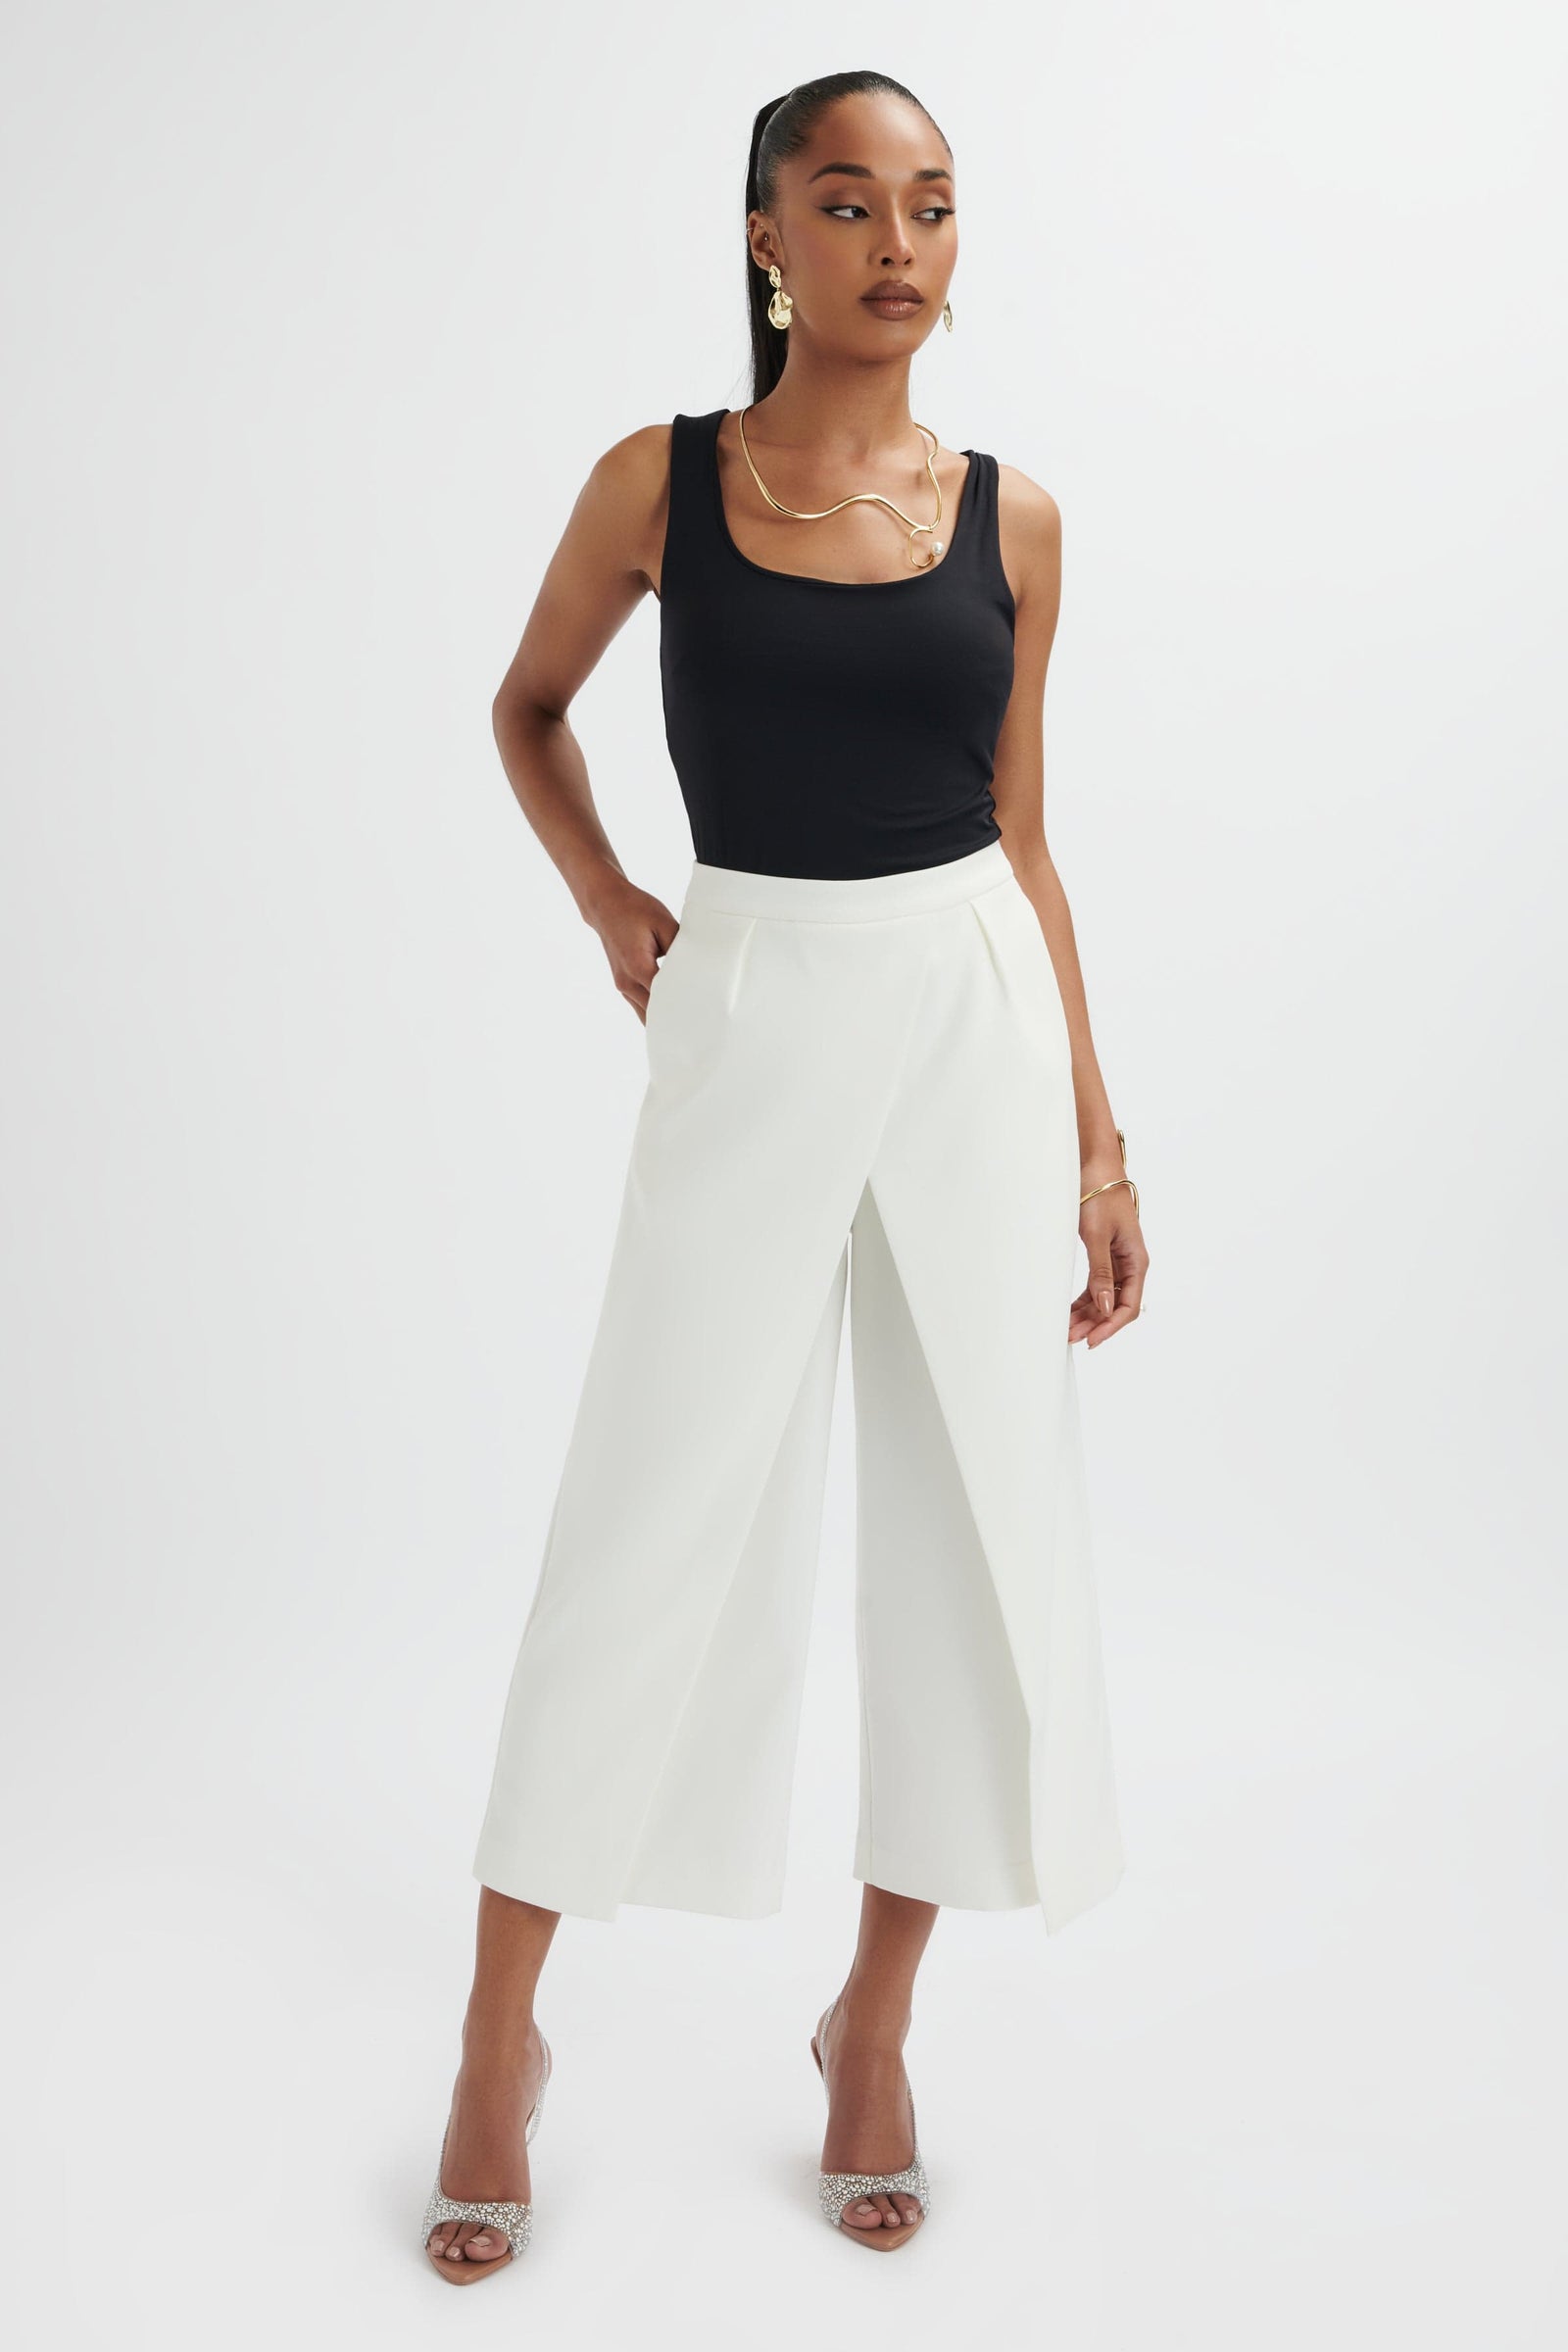 Womens Trousers | High Waist, Tailored & Leather Trousers | UK